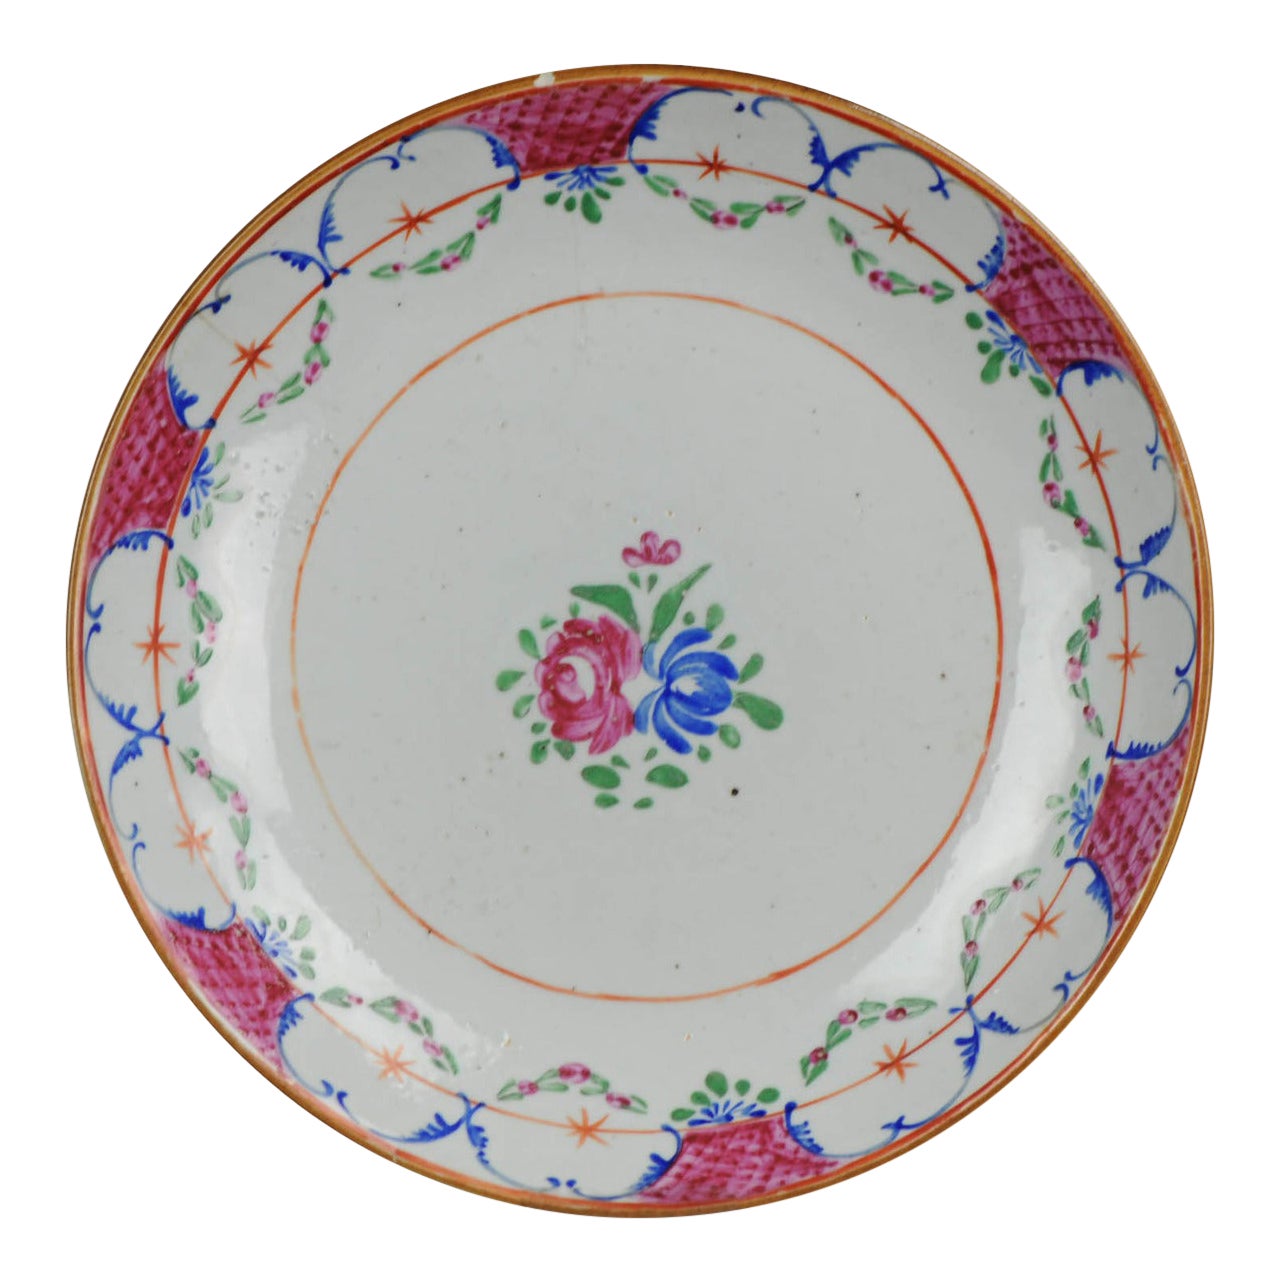 Antique Chinese Porcelain Charger Plate Qianglong Jiaqing Qing, ca 1780 - 1810 For Sale